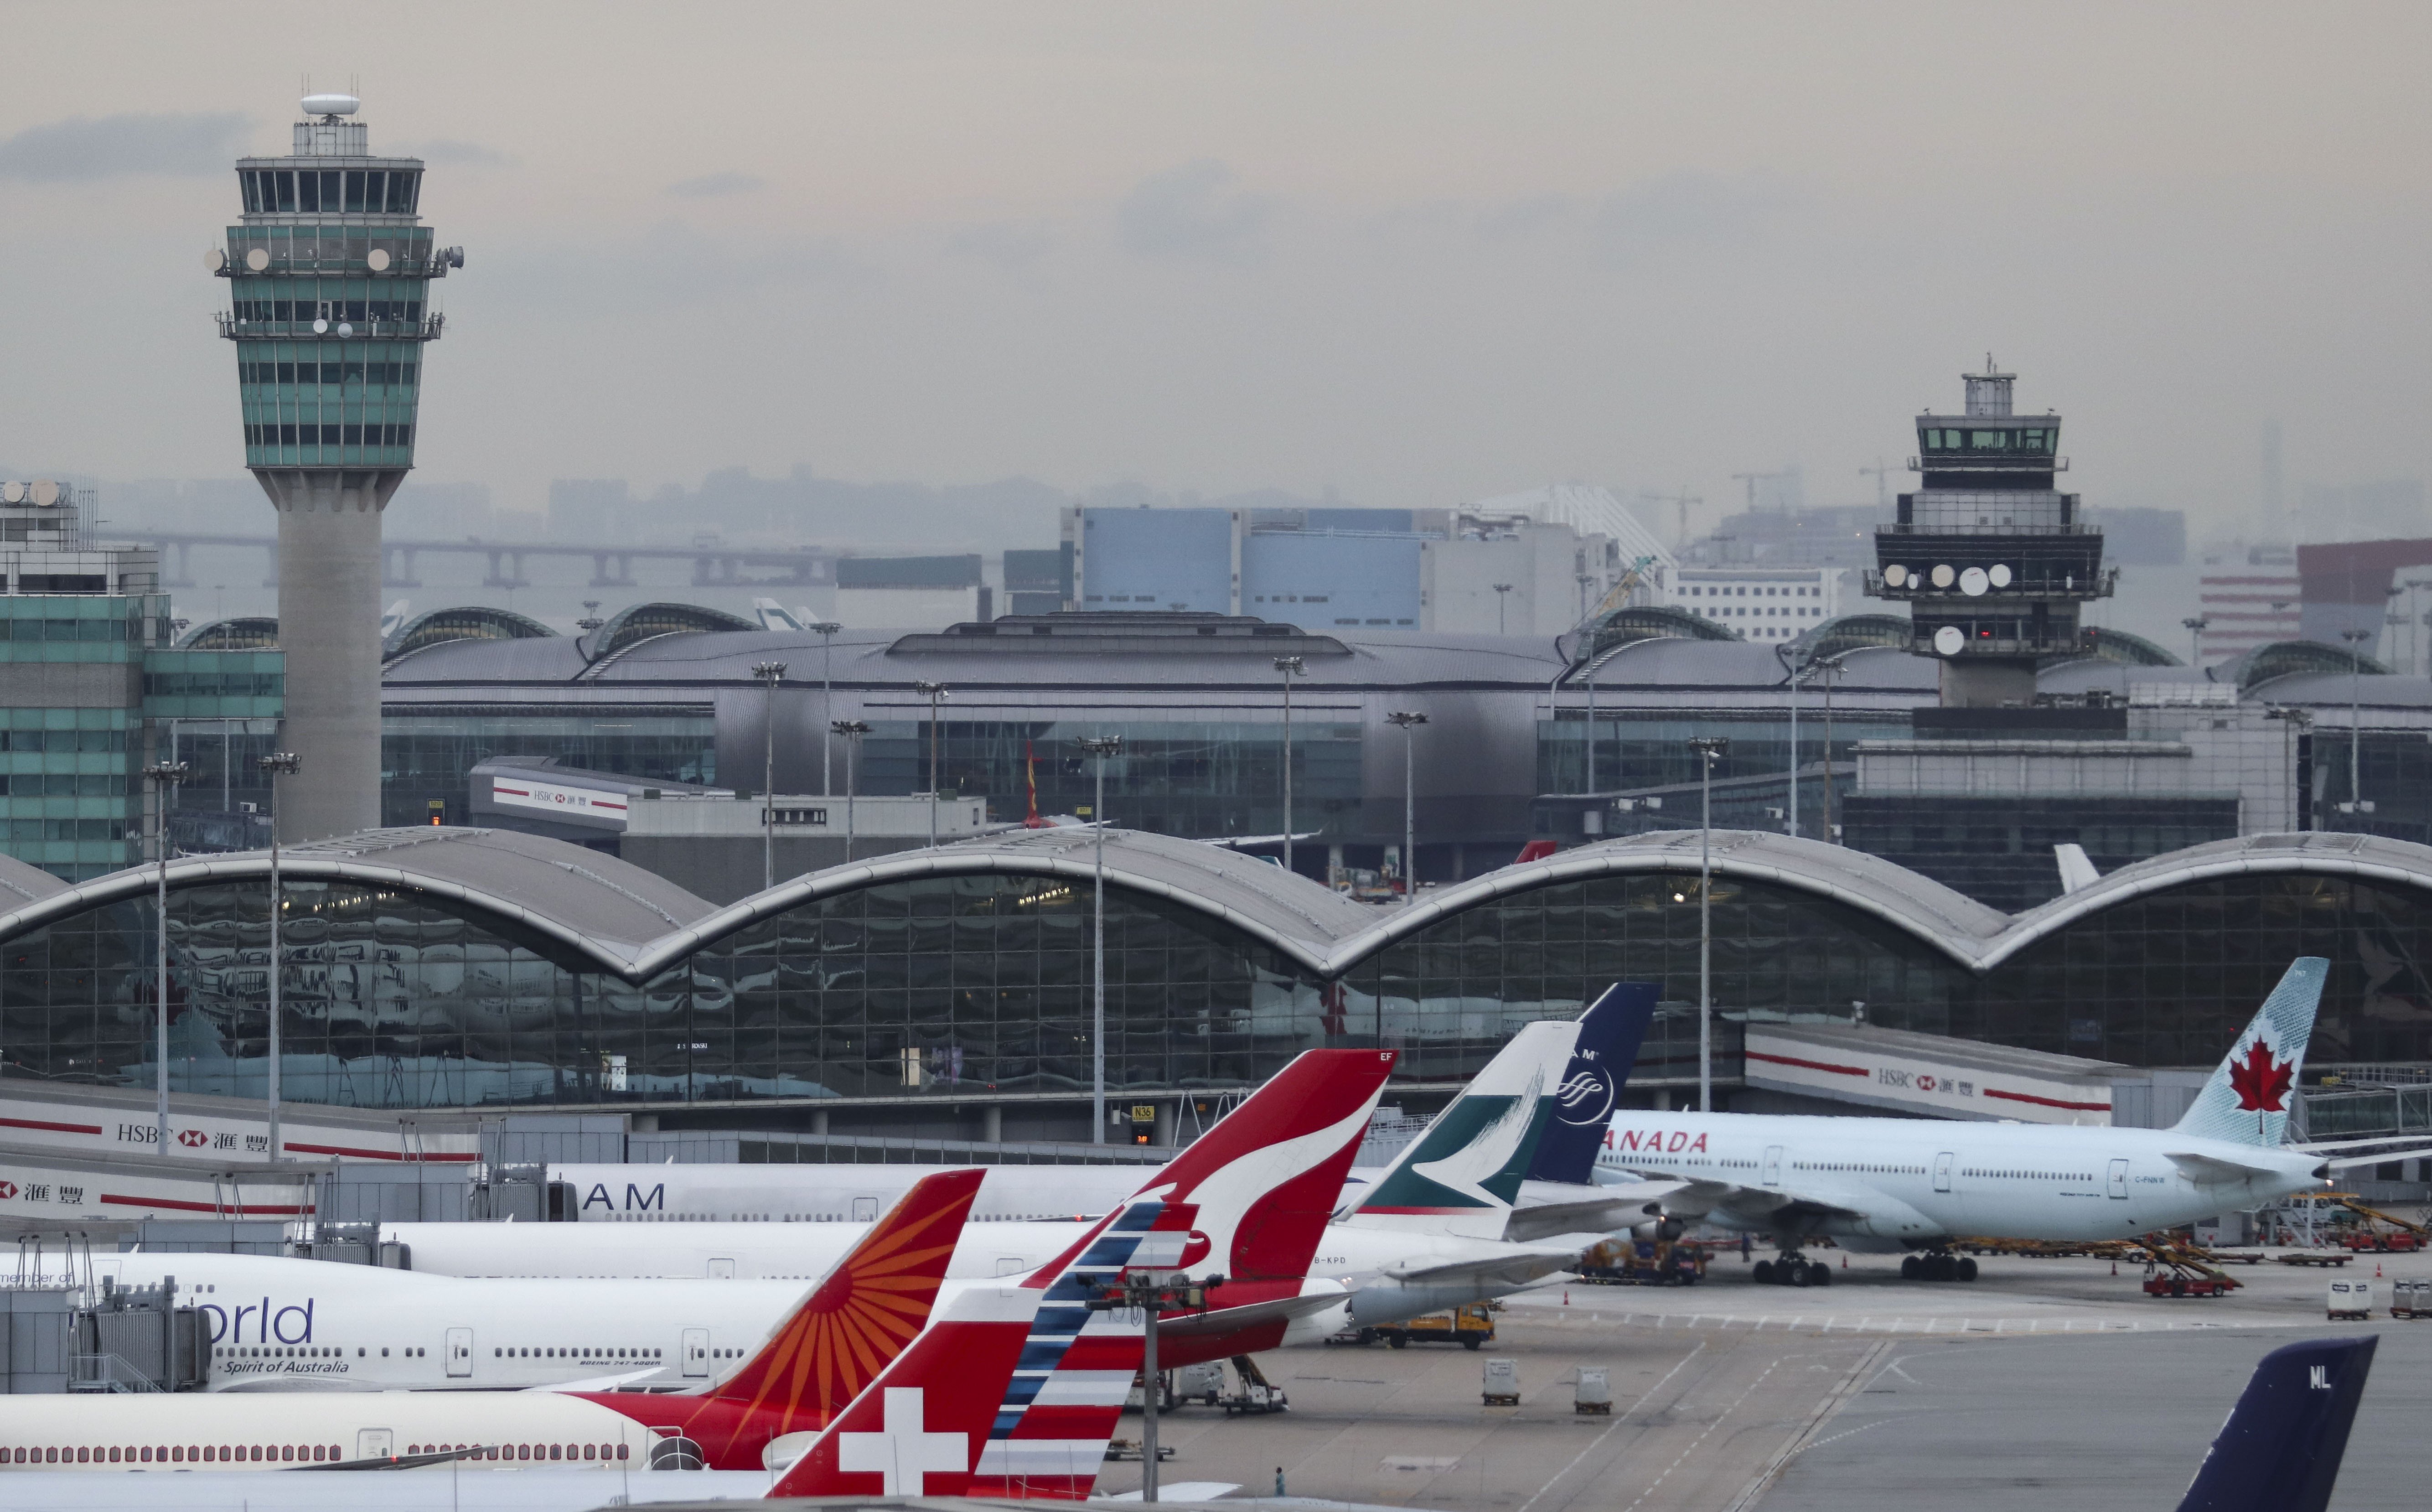 Hong Kong International Airport is one of the busiest in the world. Photo: Roy Issa